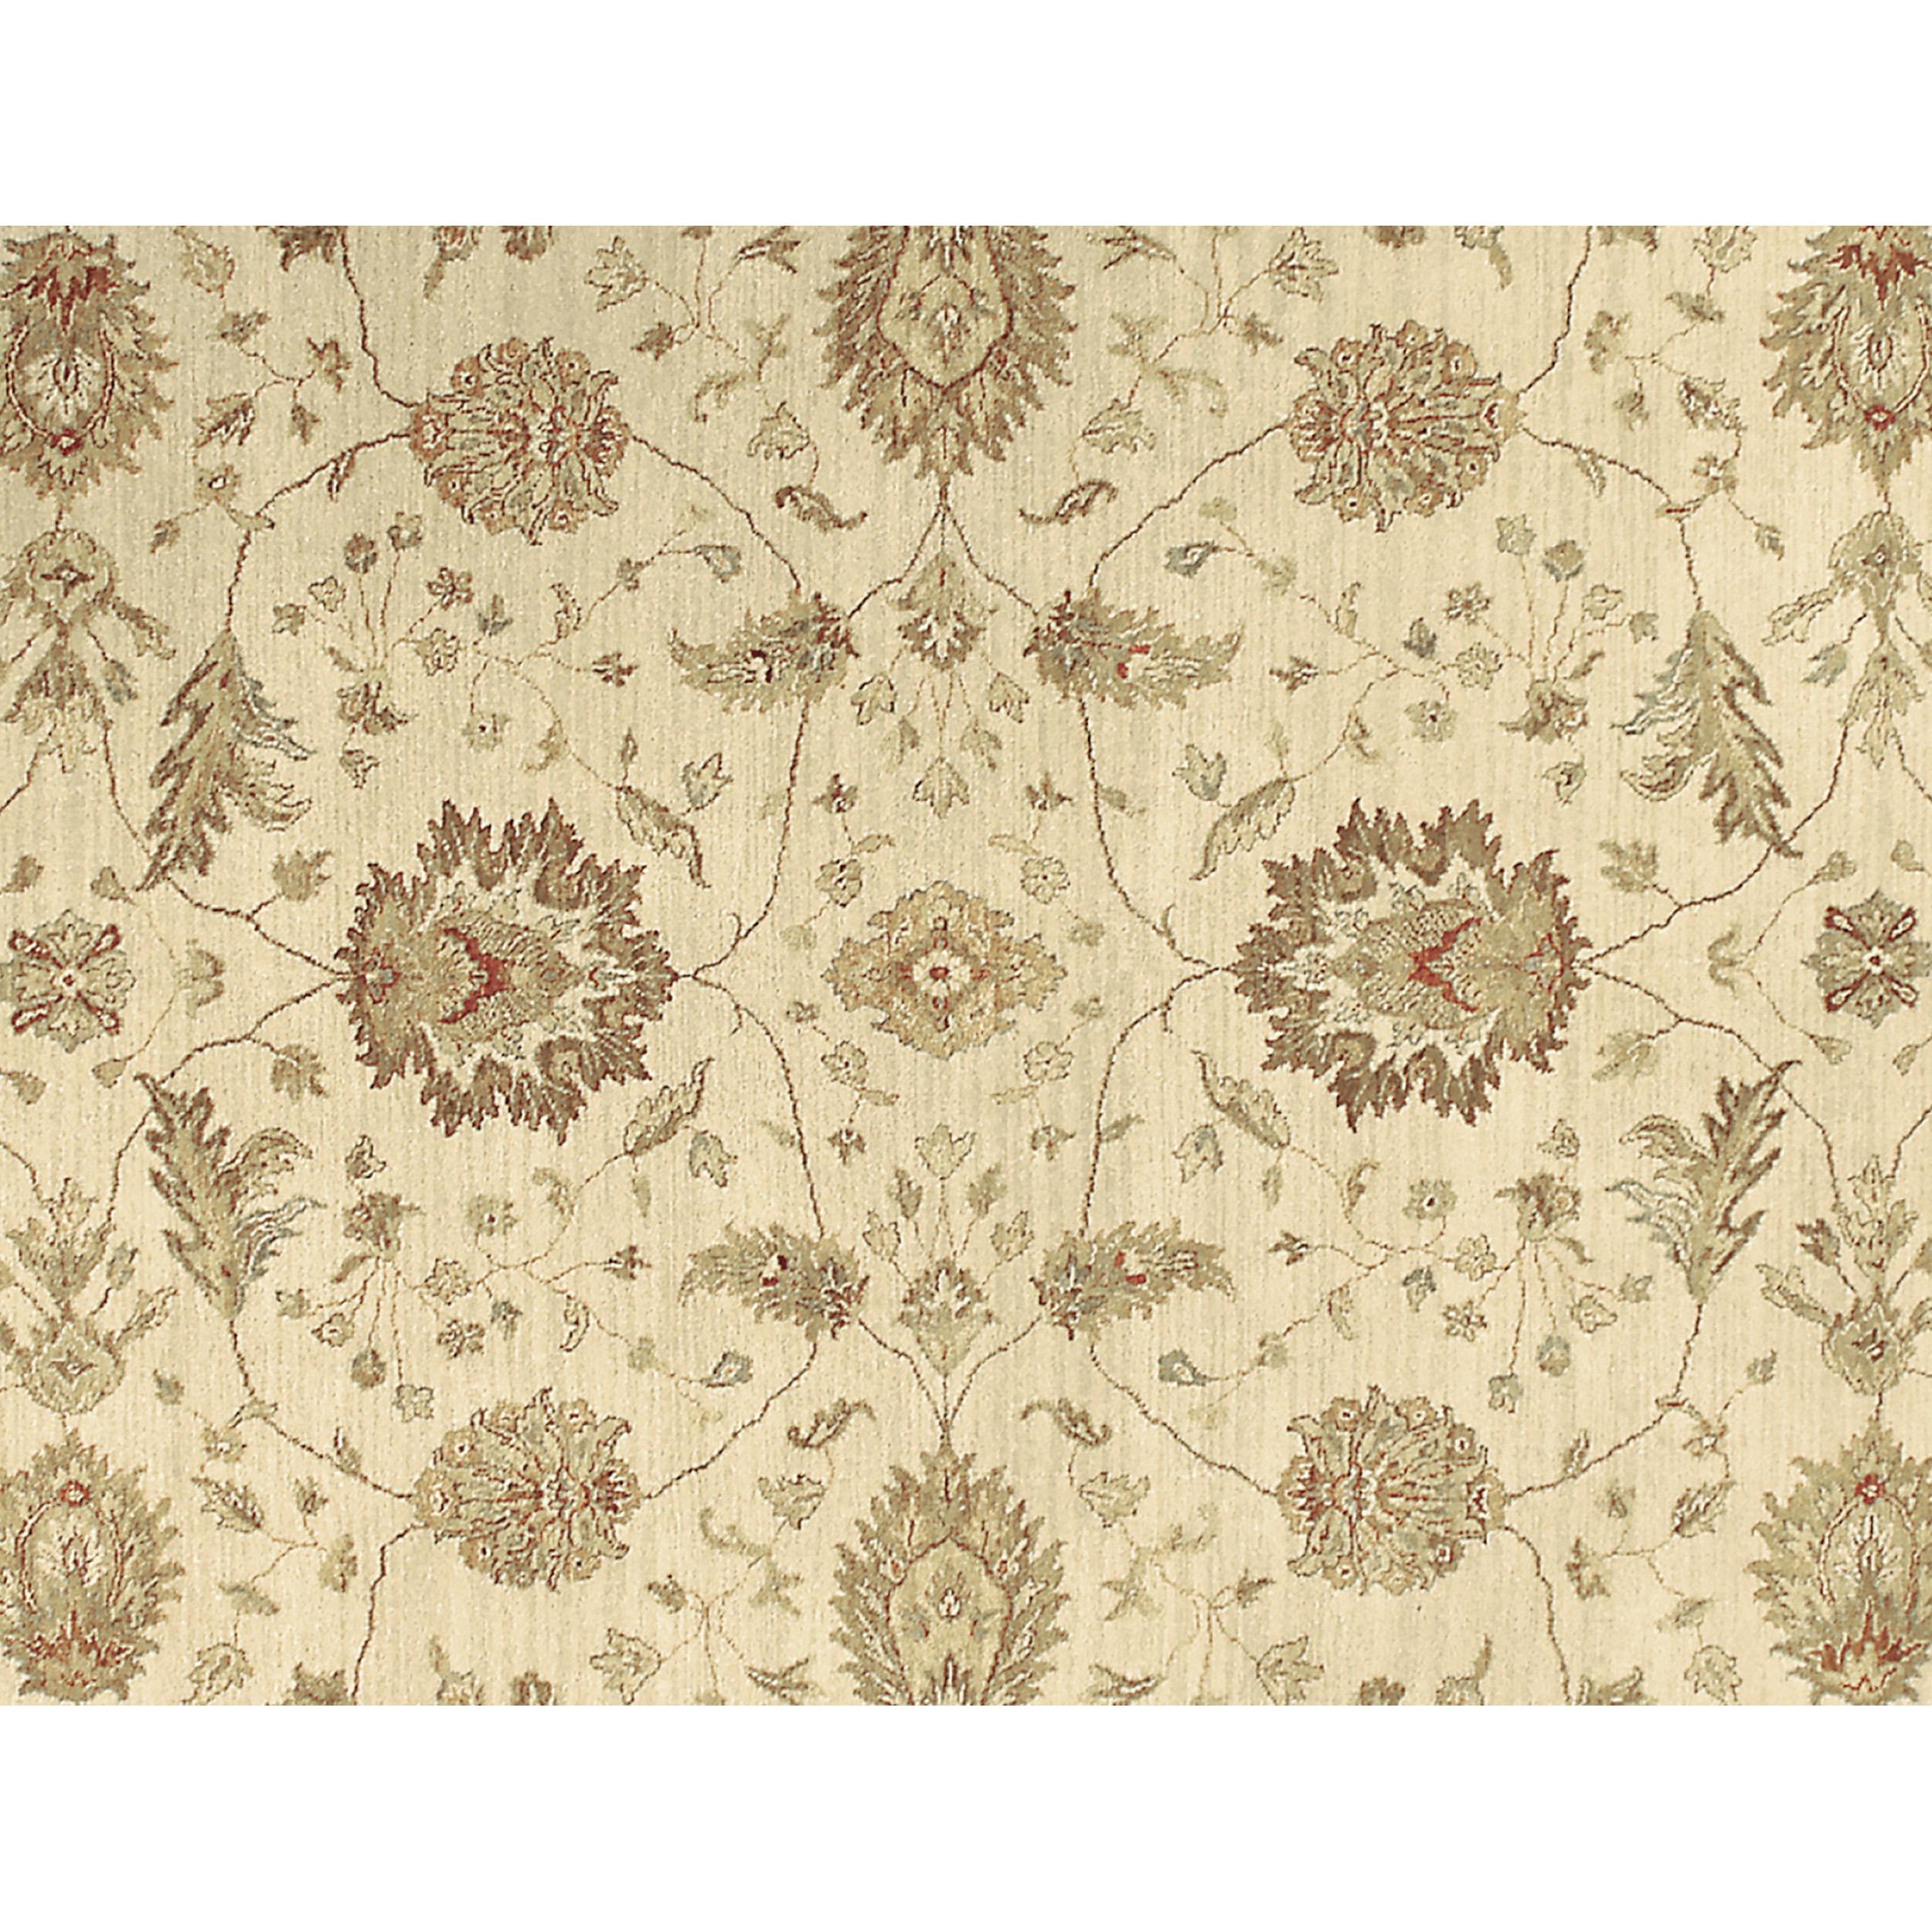 Agra Luxury Traditional Hand-Knotted Cream/Fawn 12X24 Rug For Sale